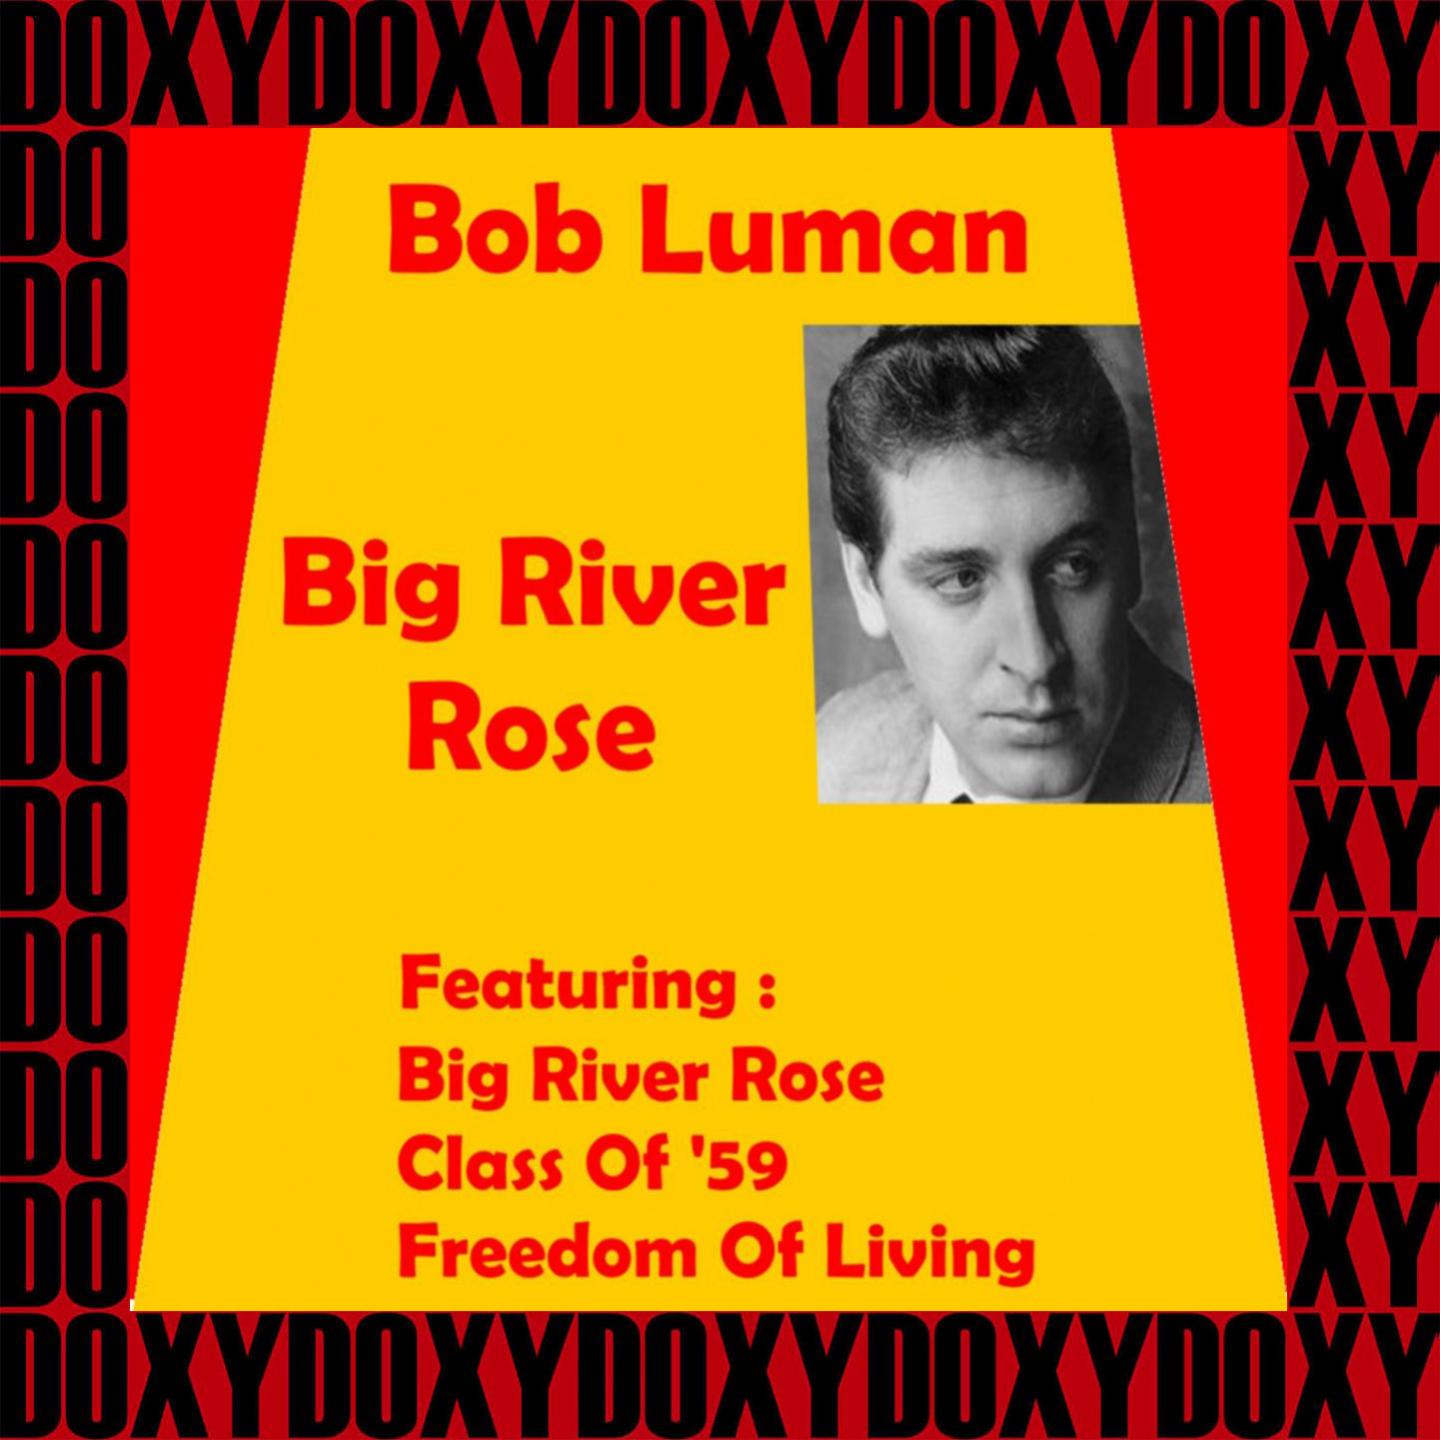 Big River Rose (Remastered Version) (Doxy Collection)